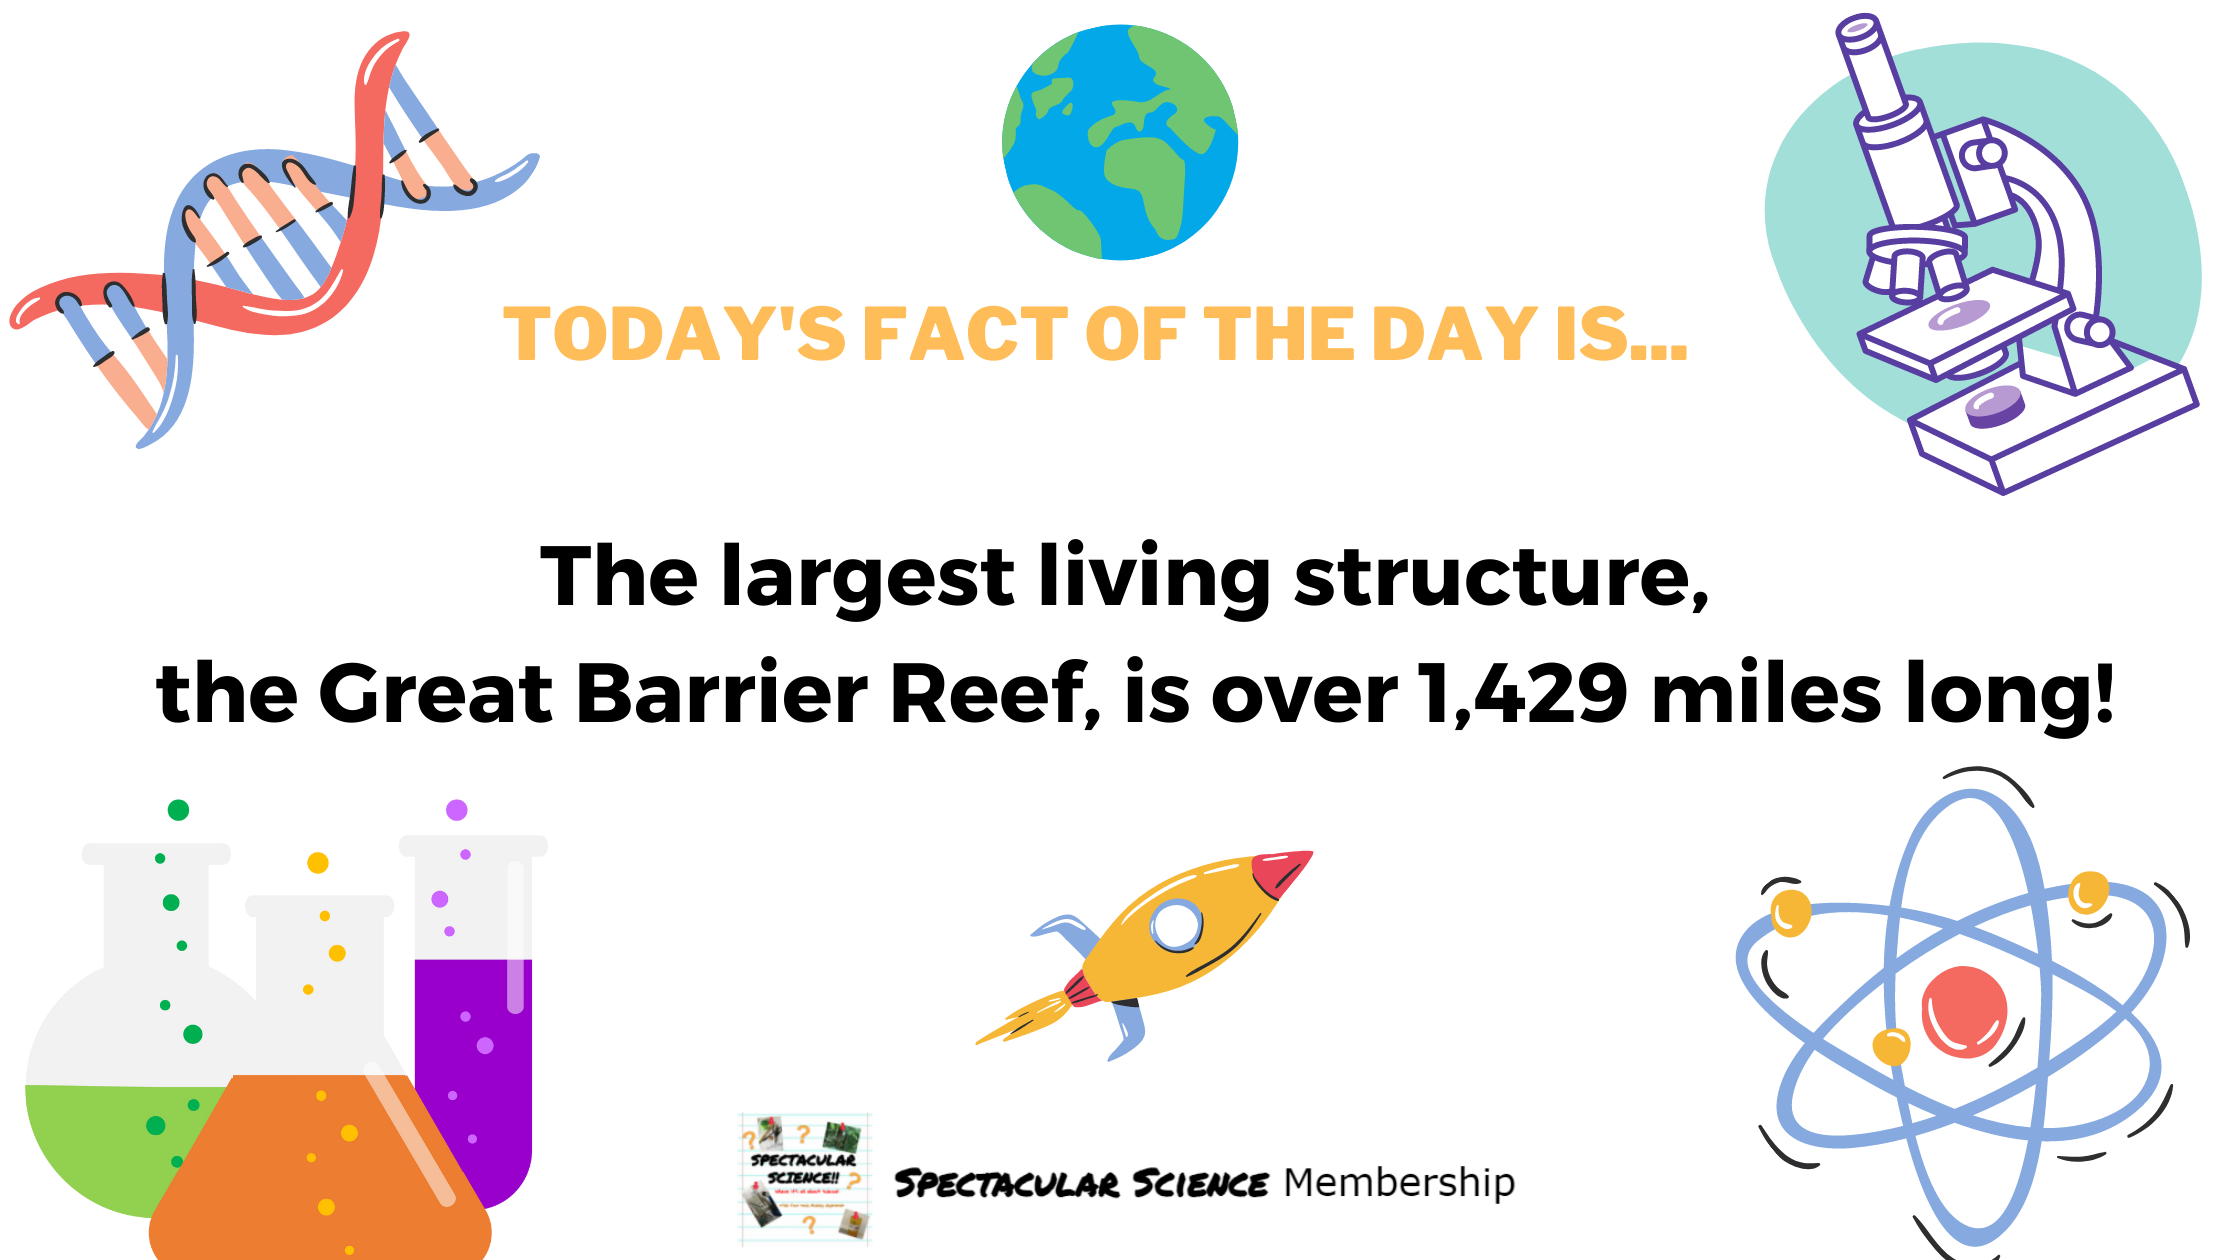 Fact of the Day Image Dec. 11th